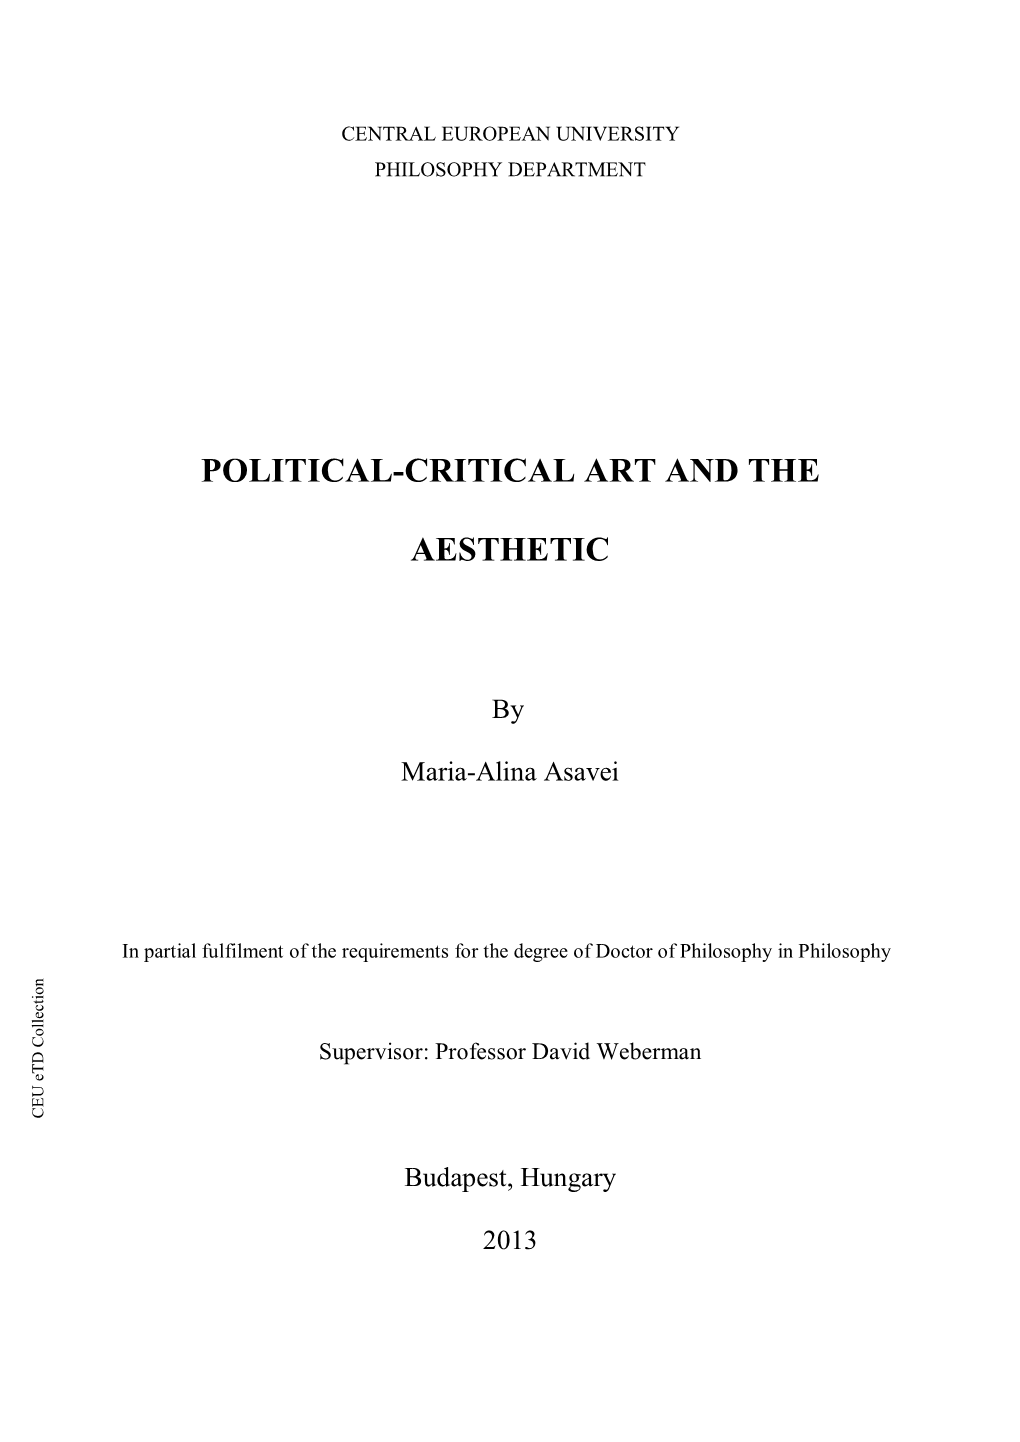 Political-Critical Art and the Aesthetic